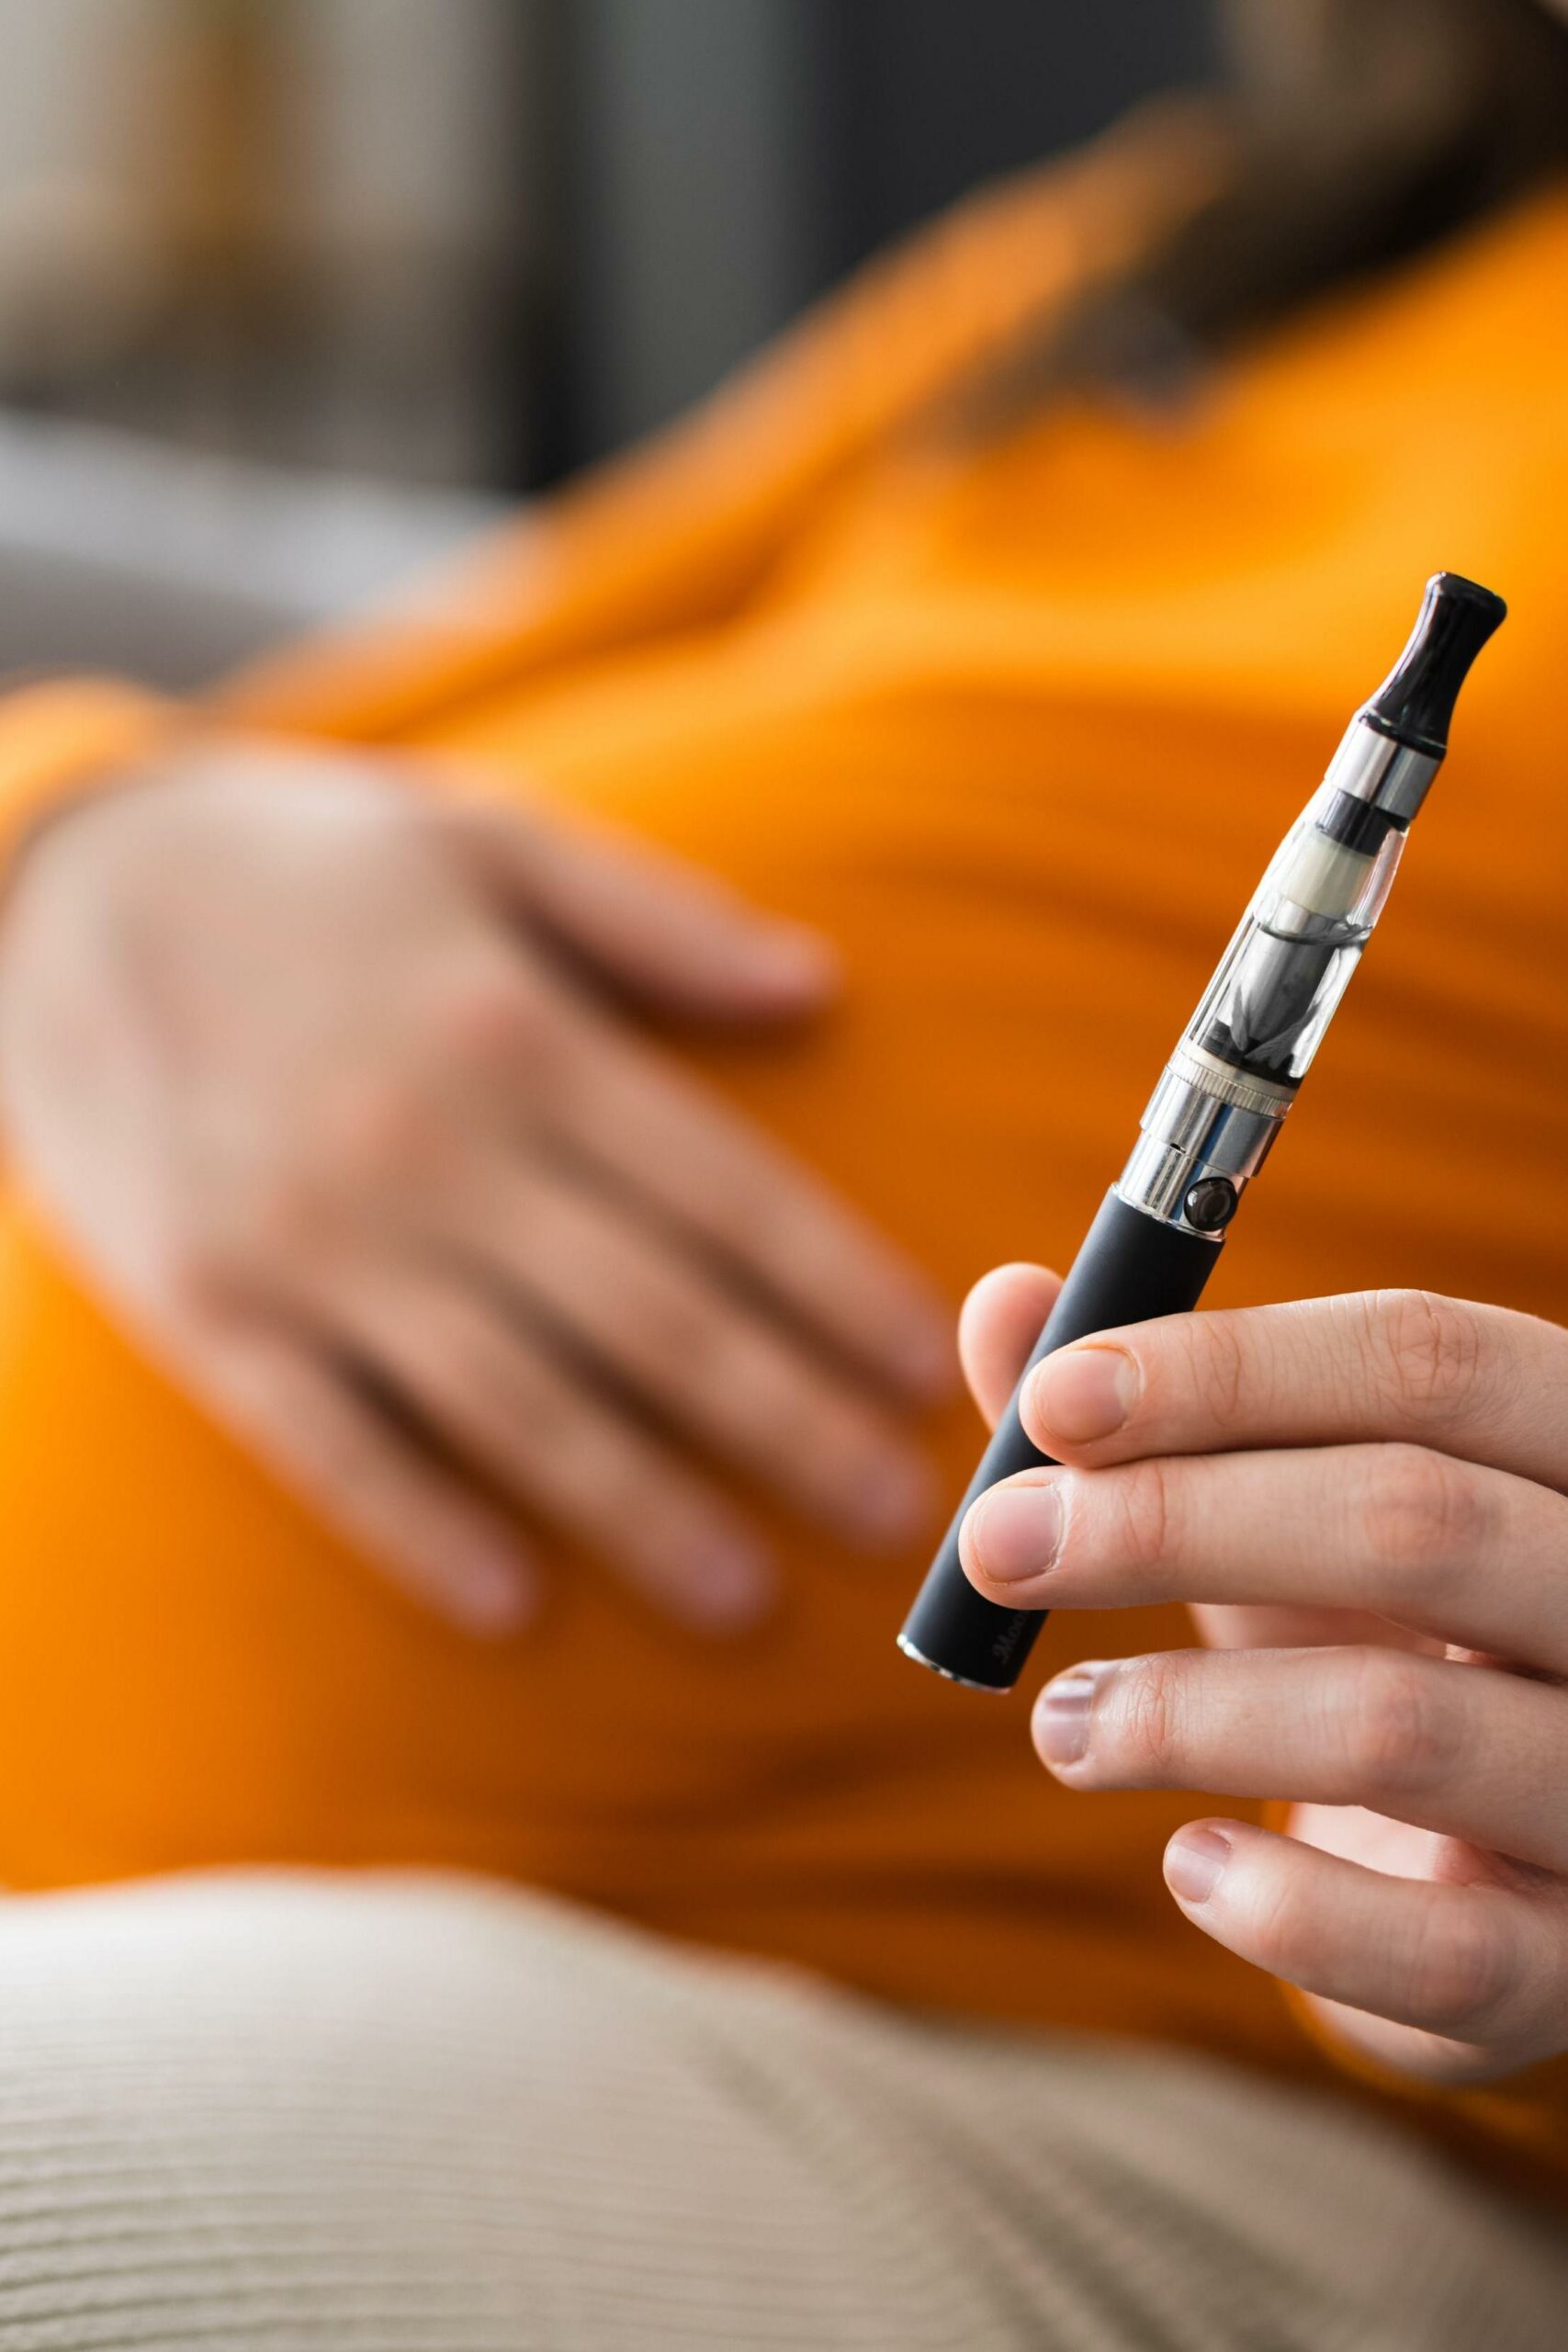 Can You Vape While Pregnant? Understanding the Risks and Recommendations